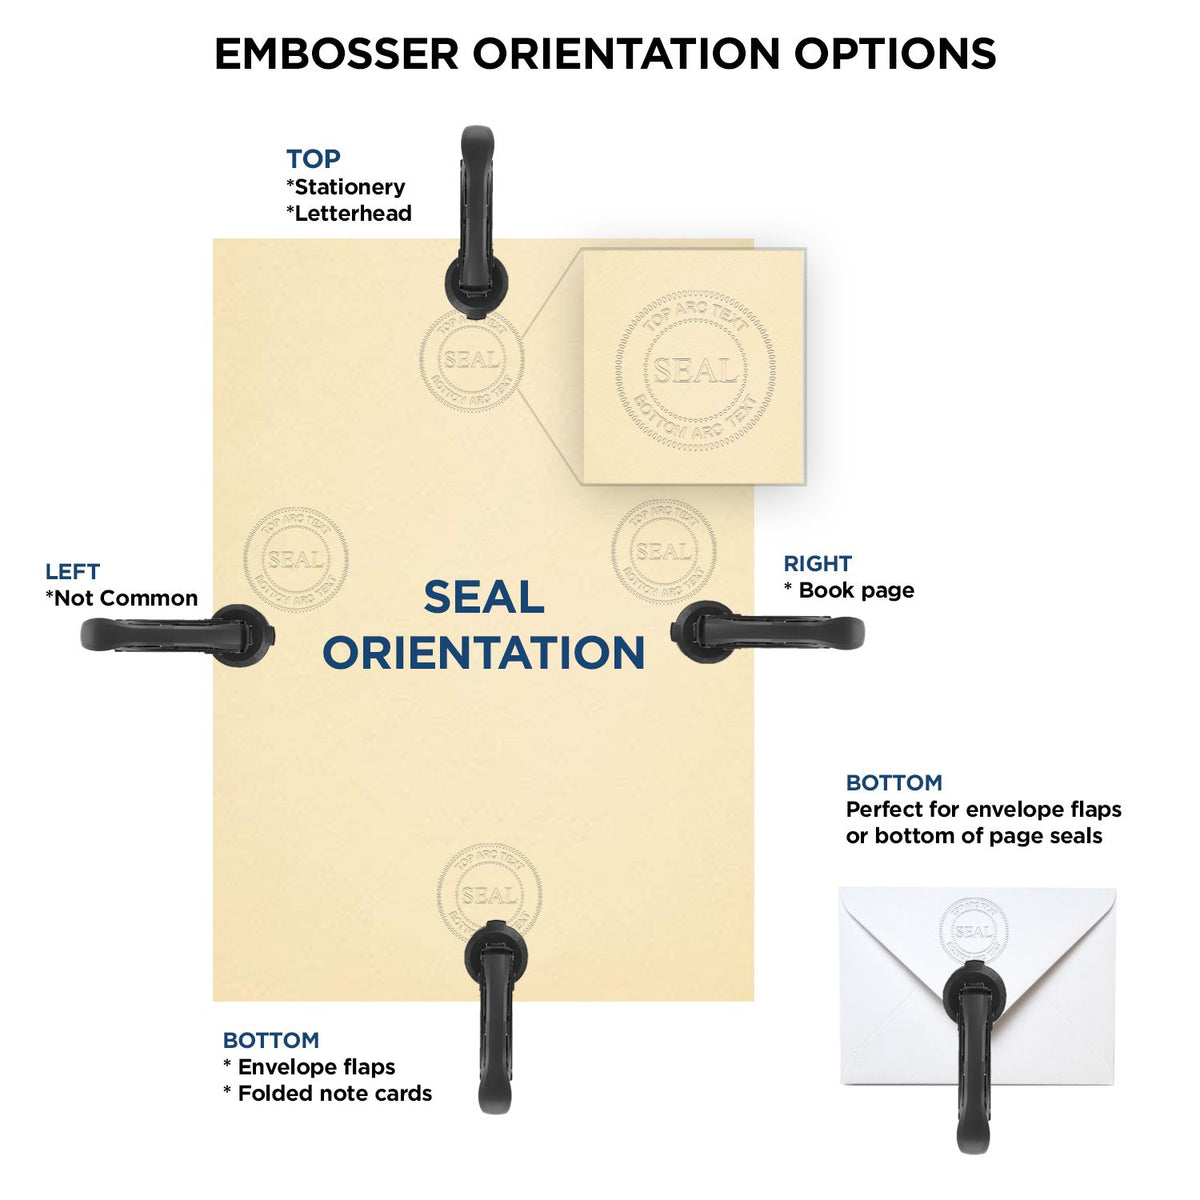 An infographic for the Gift New York Landscape Architect Seal showing embosser orientation, this is showing examples of a top, bottom, right and left insert.